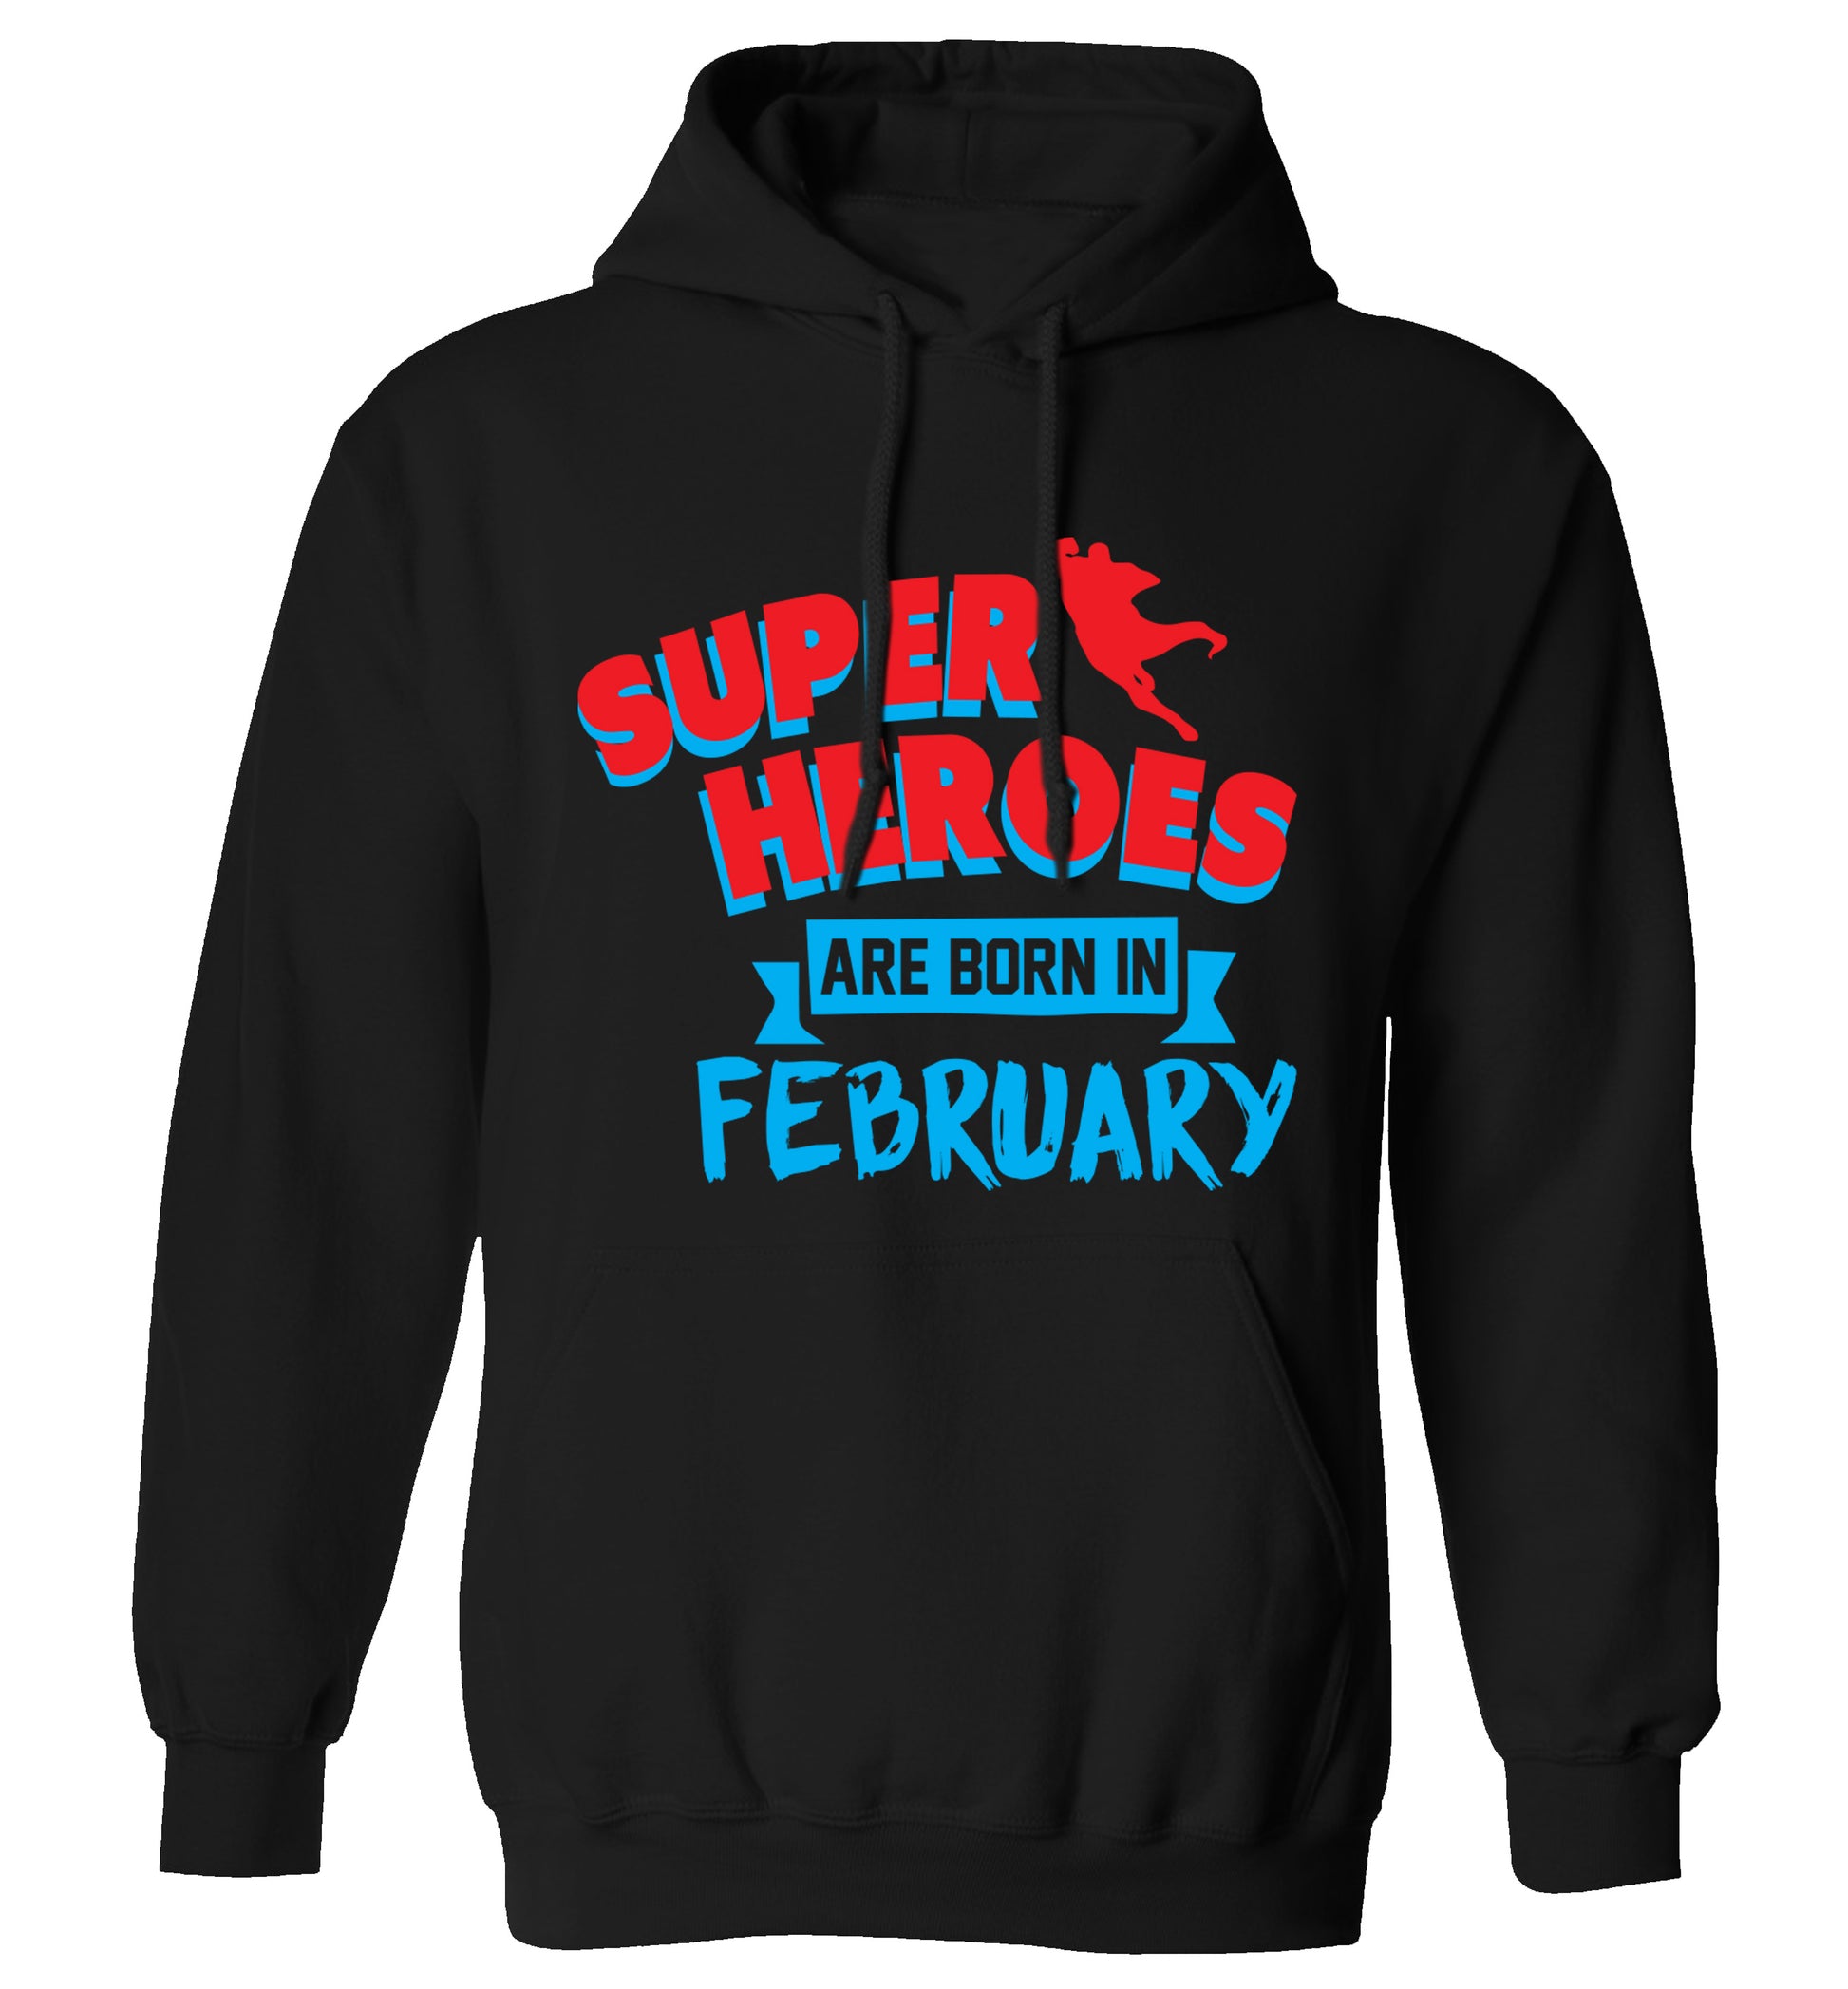 superheroes are born in February adults unisex black hoodie 2XL